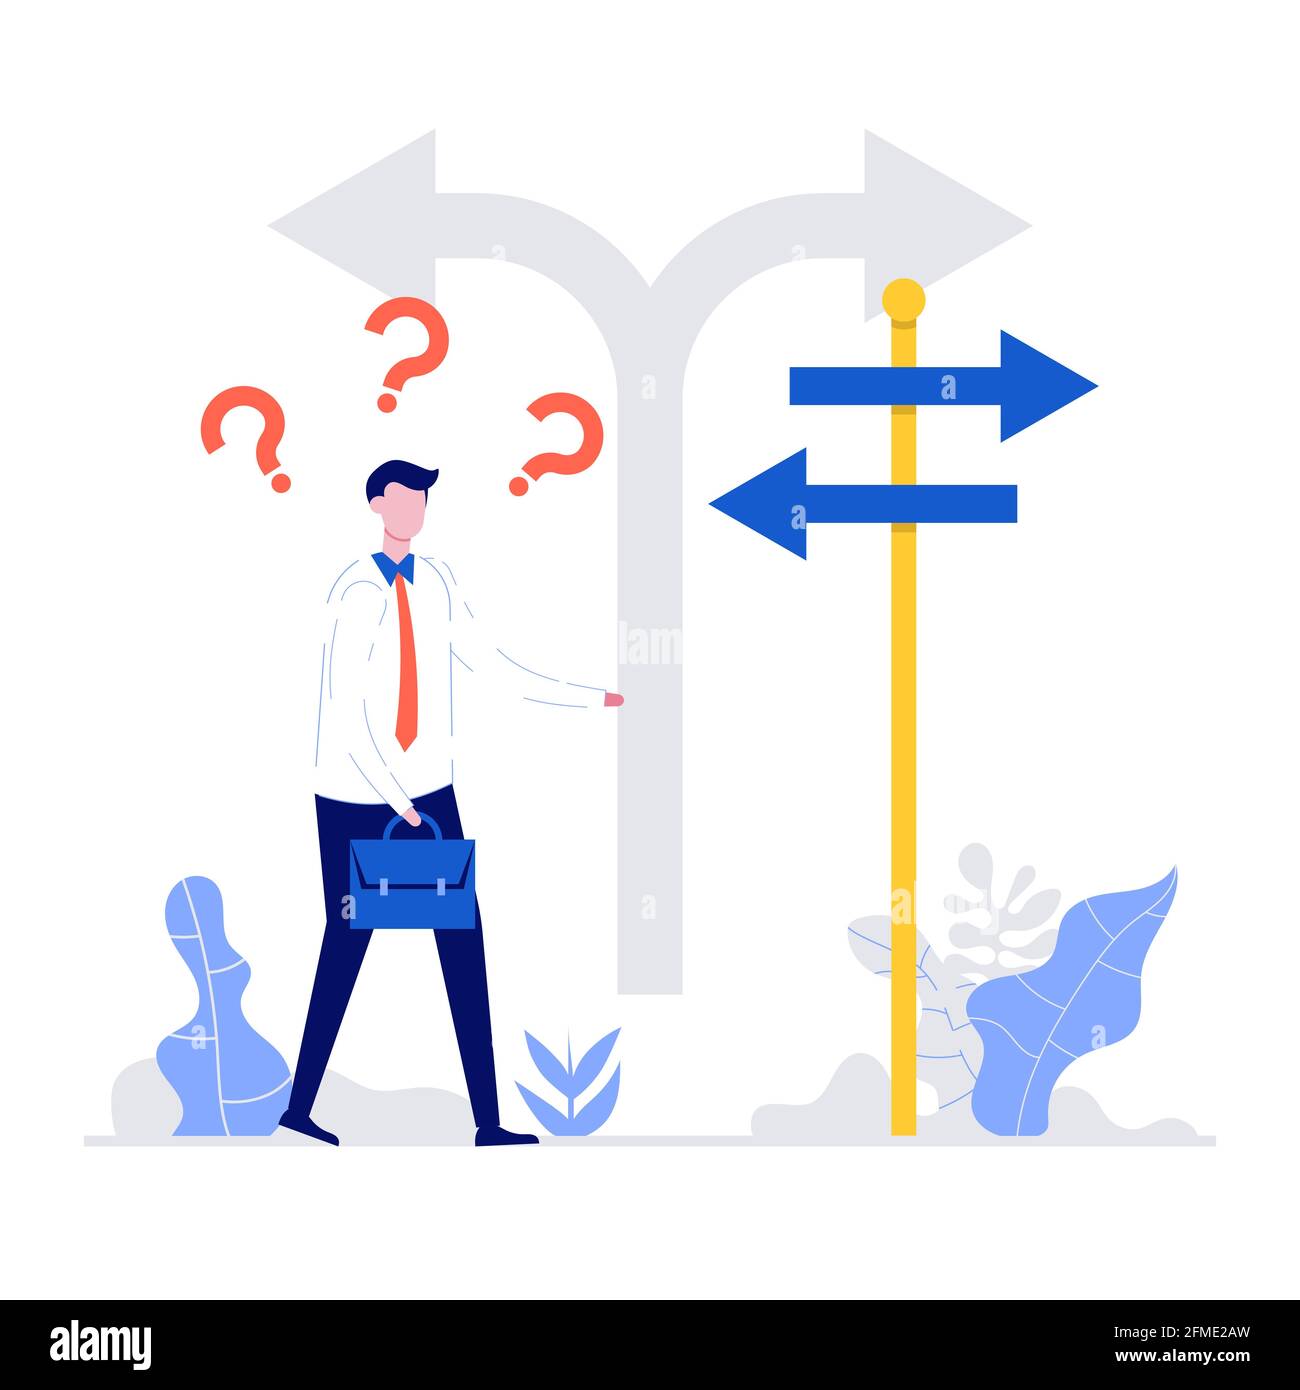 Confused businessman standing at a crossroads and looking directional sign arrows. Symbol for choice, career path or opportunities, business concept d Stock Vector